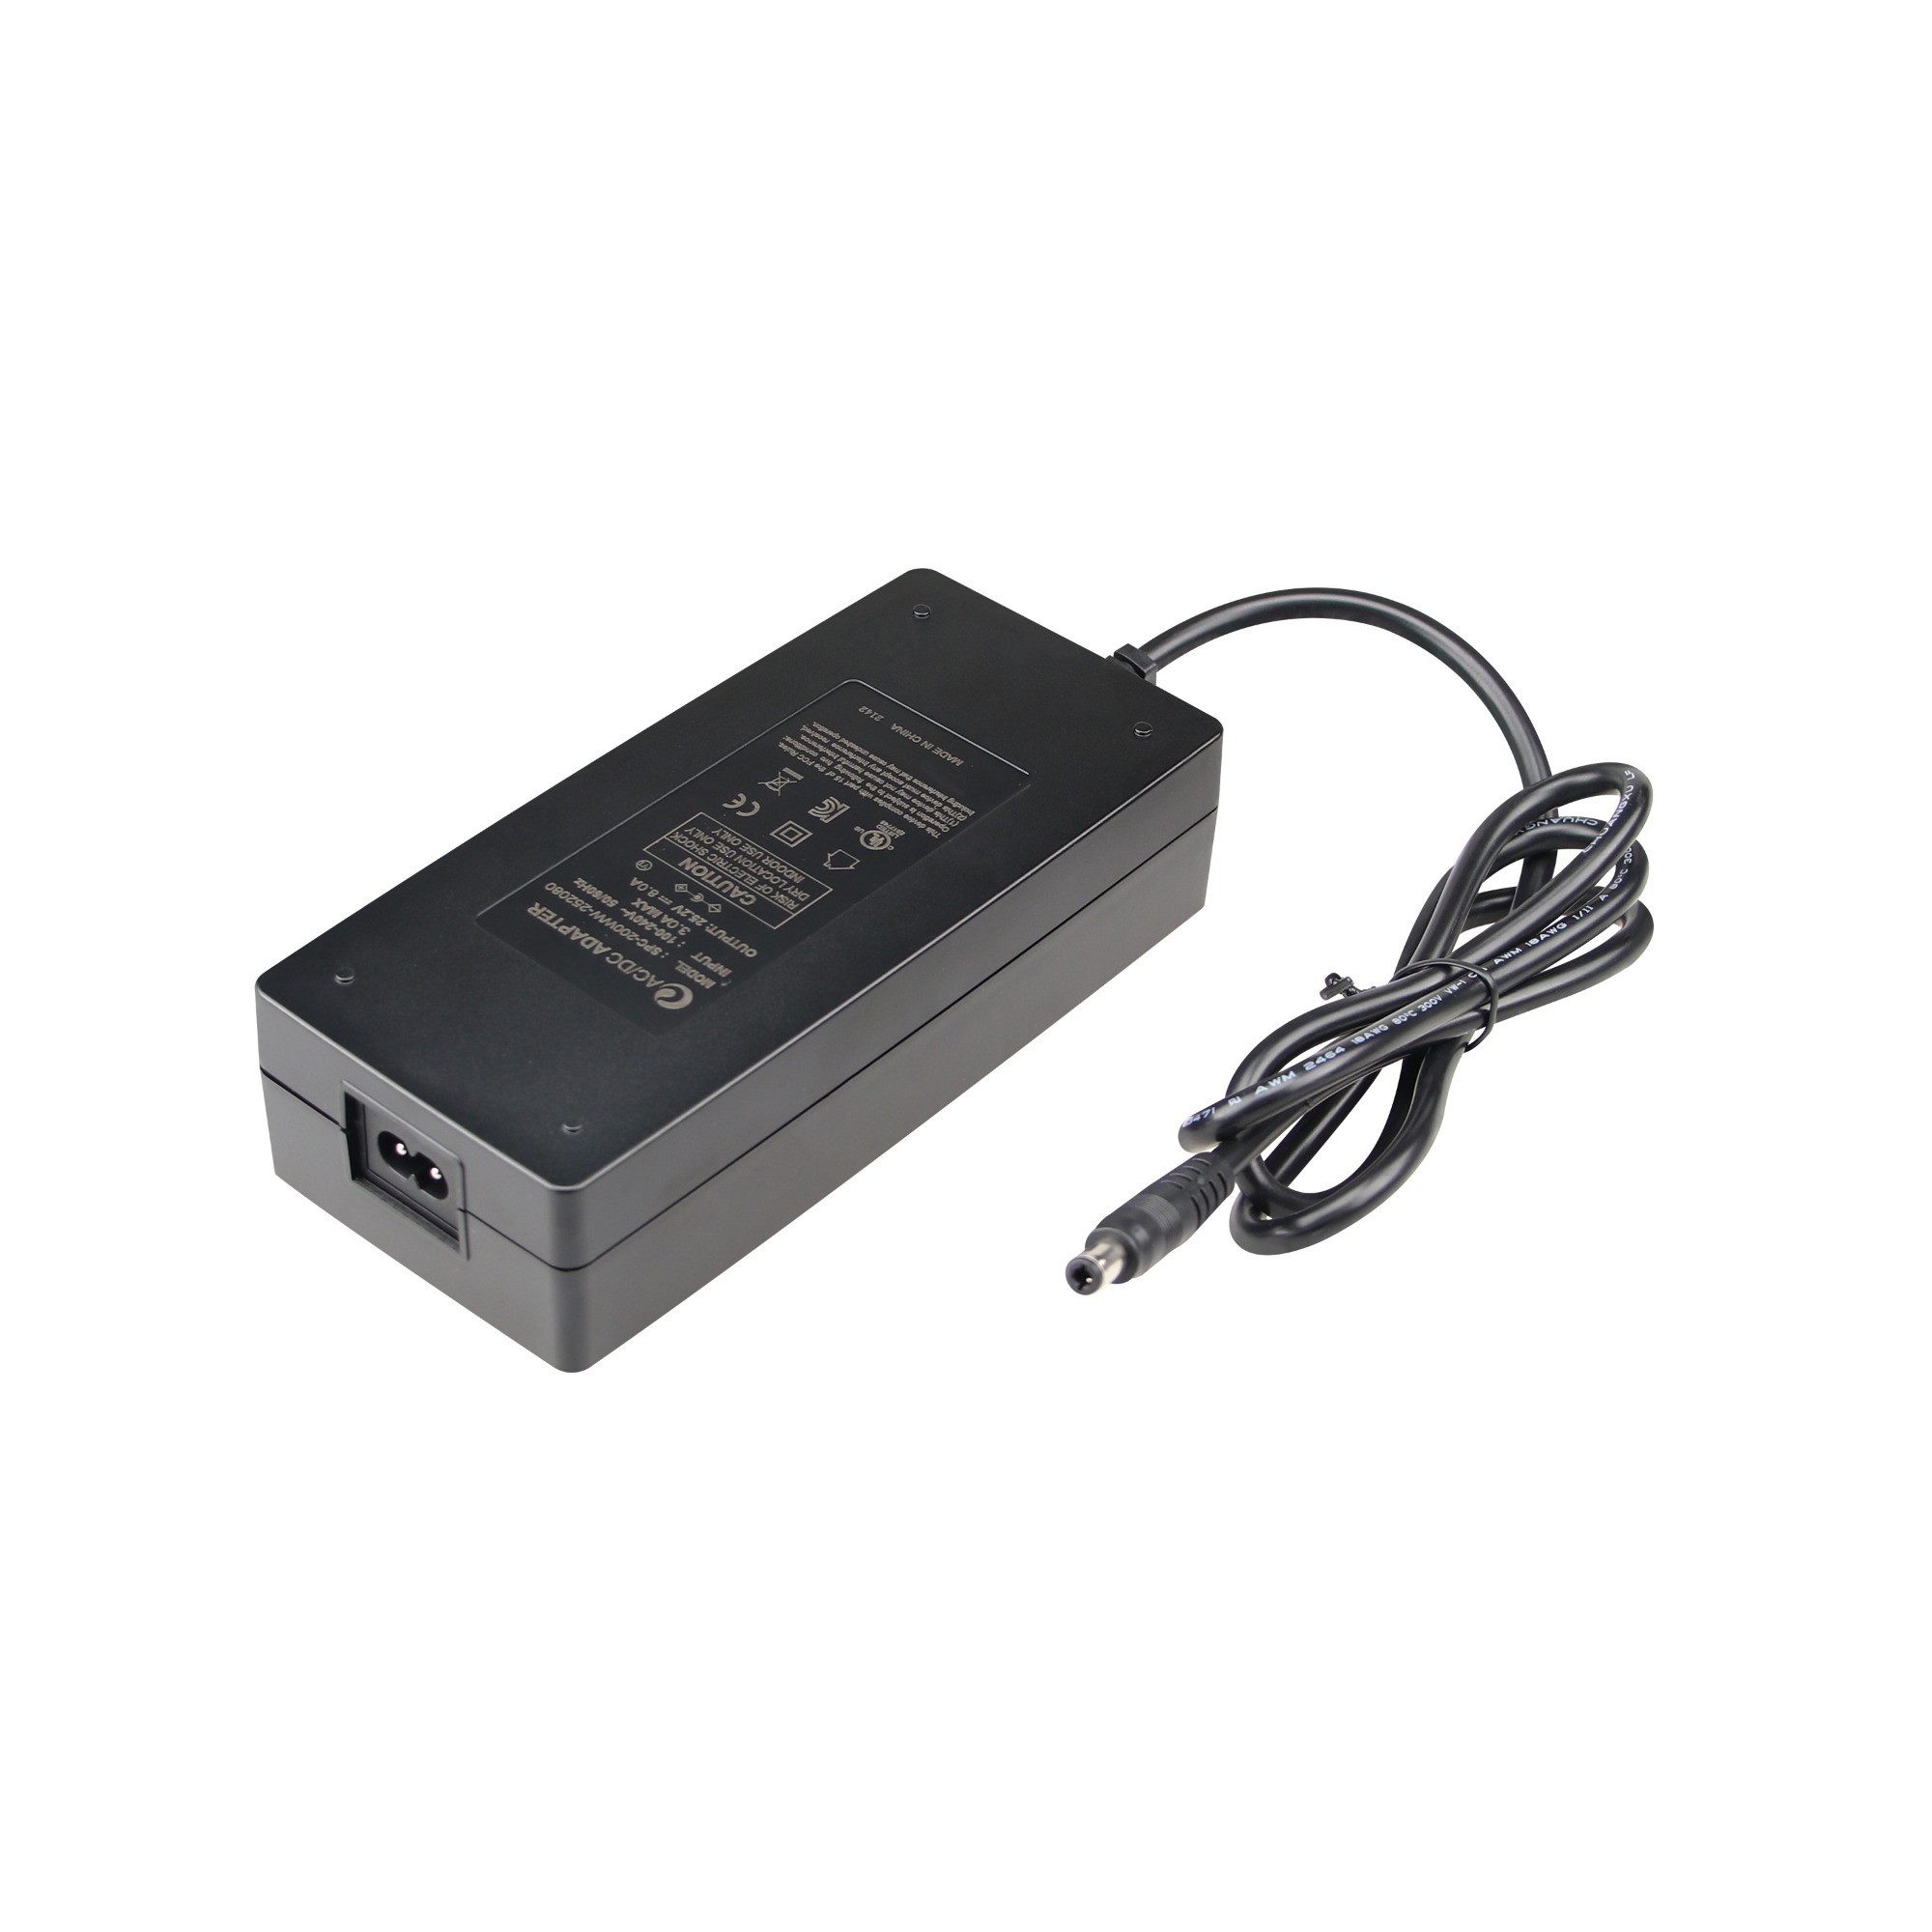 Smart charger 58.8V 3A Lithium battery charger For 48V 14S Li-ion Battery charger Electric Scooter E-bike motorcycle